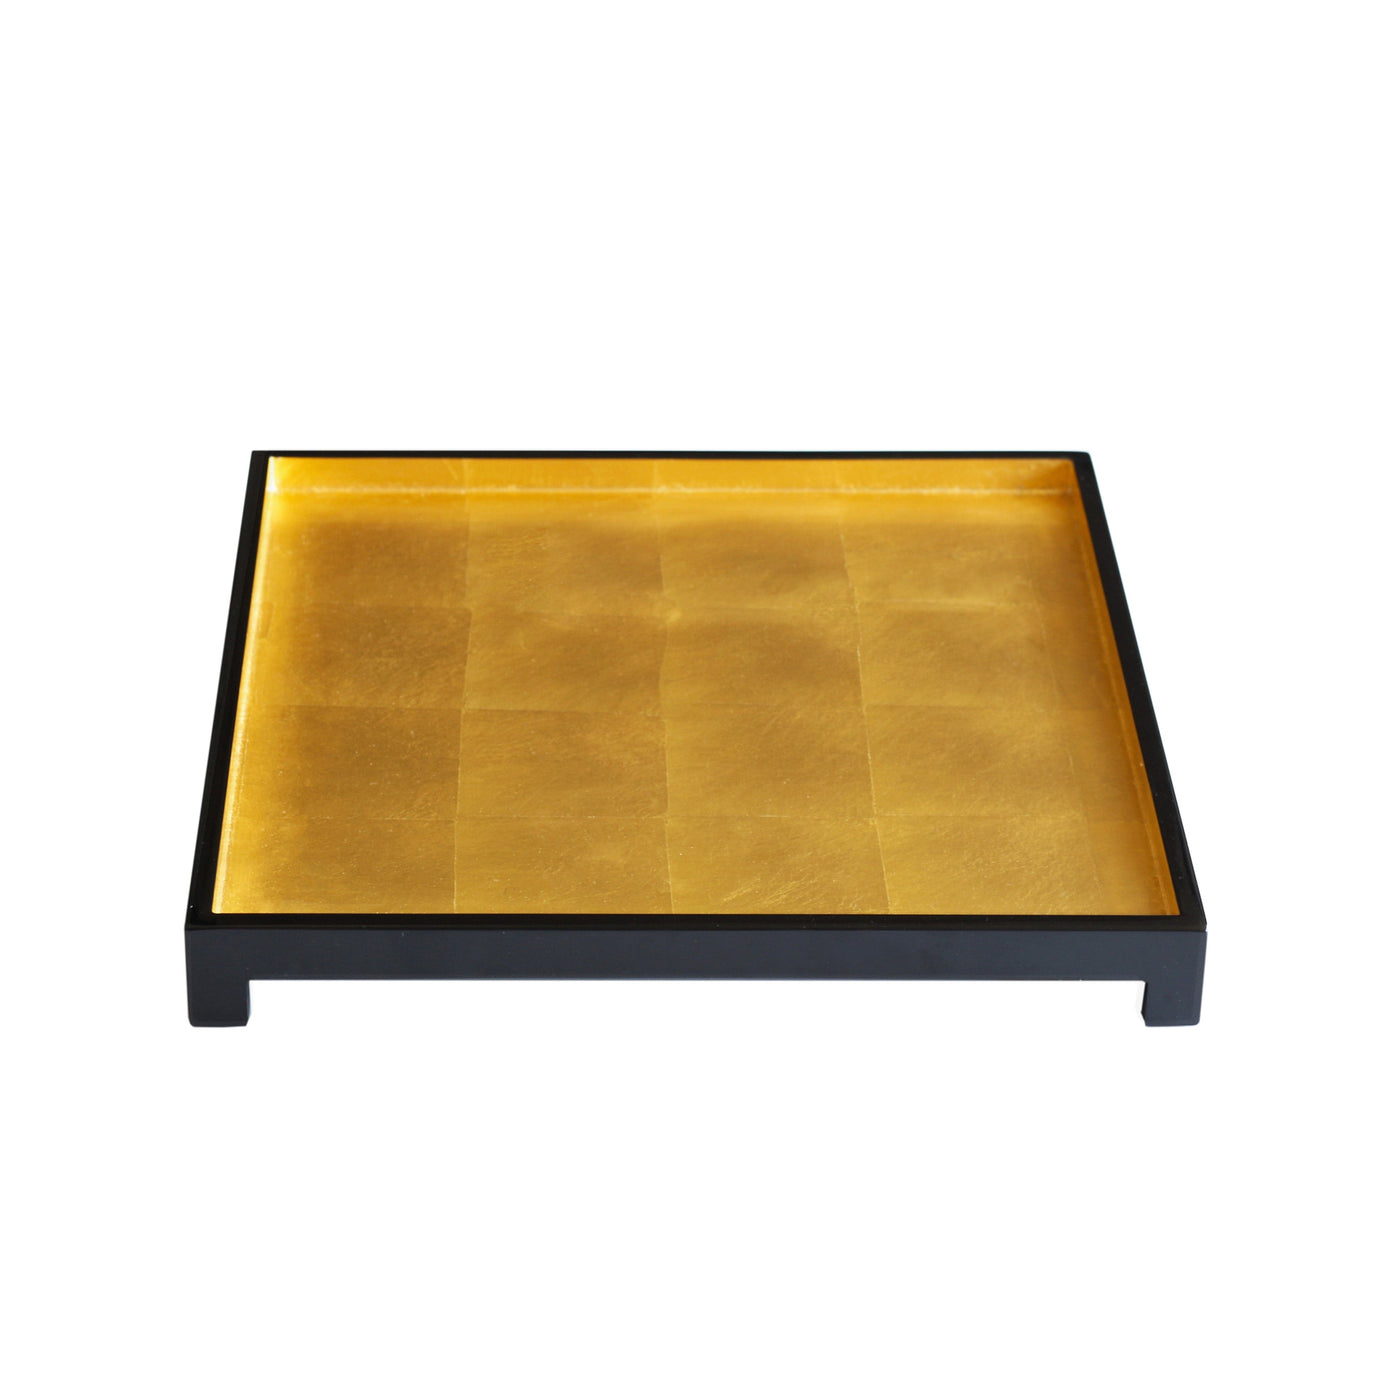 The London Tray in Gold Leaf Square - Posh Trading Company Trays - Interior furnishings london